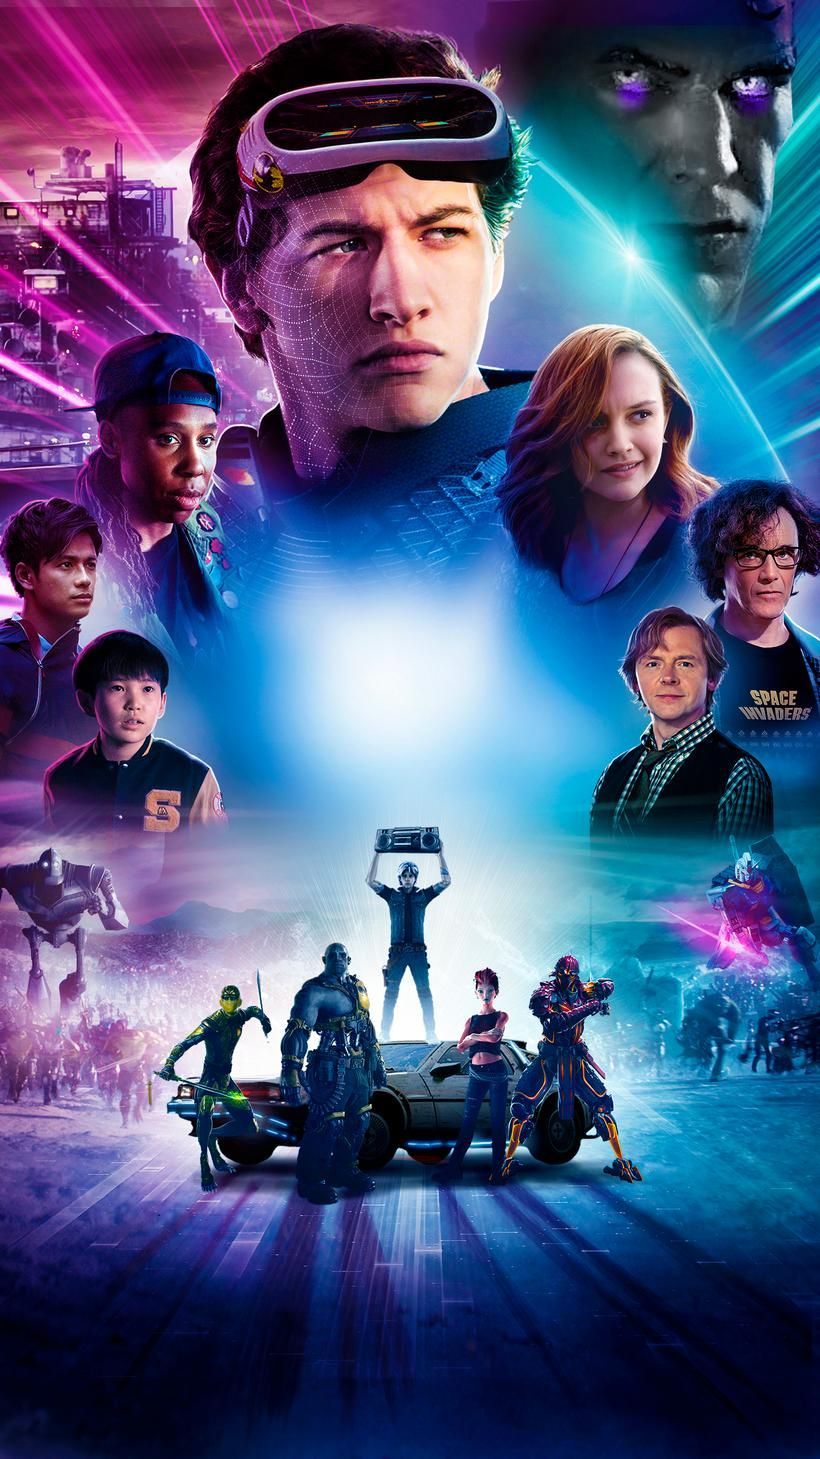 Ready Player One (2018) Phone Wallpaper. Moviemania. Ready player one, Ready player one movie, Player one